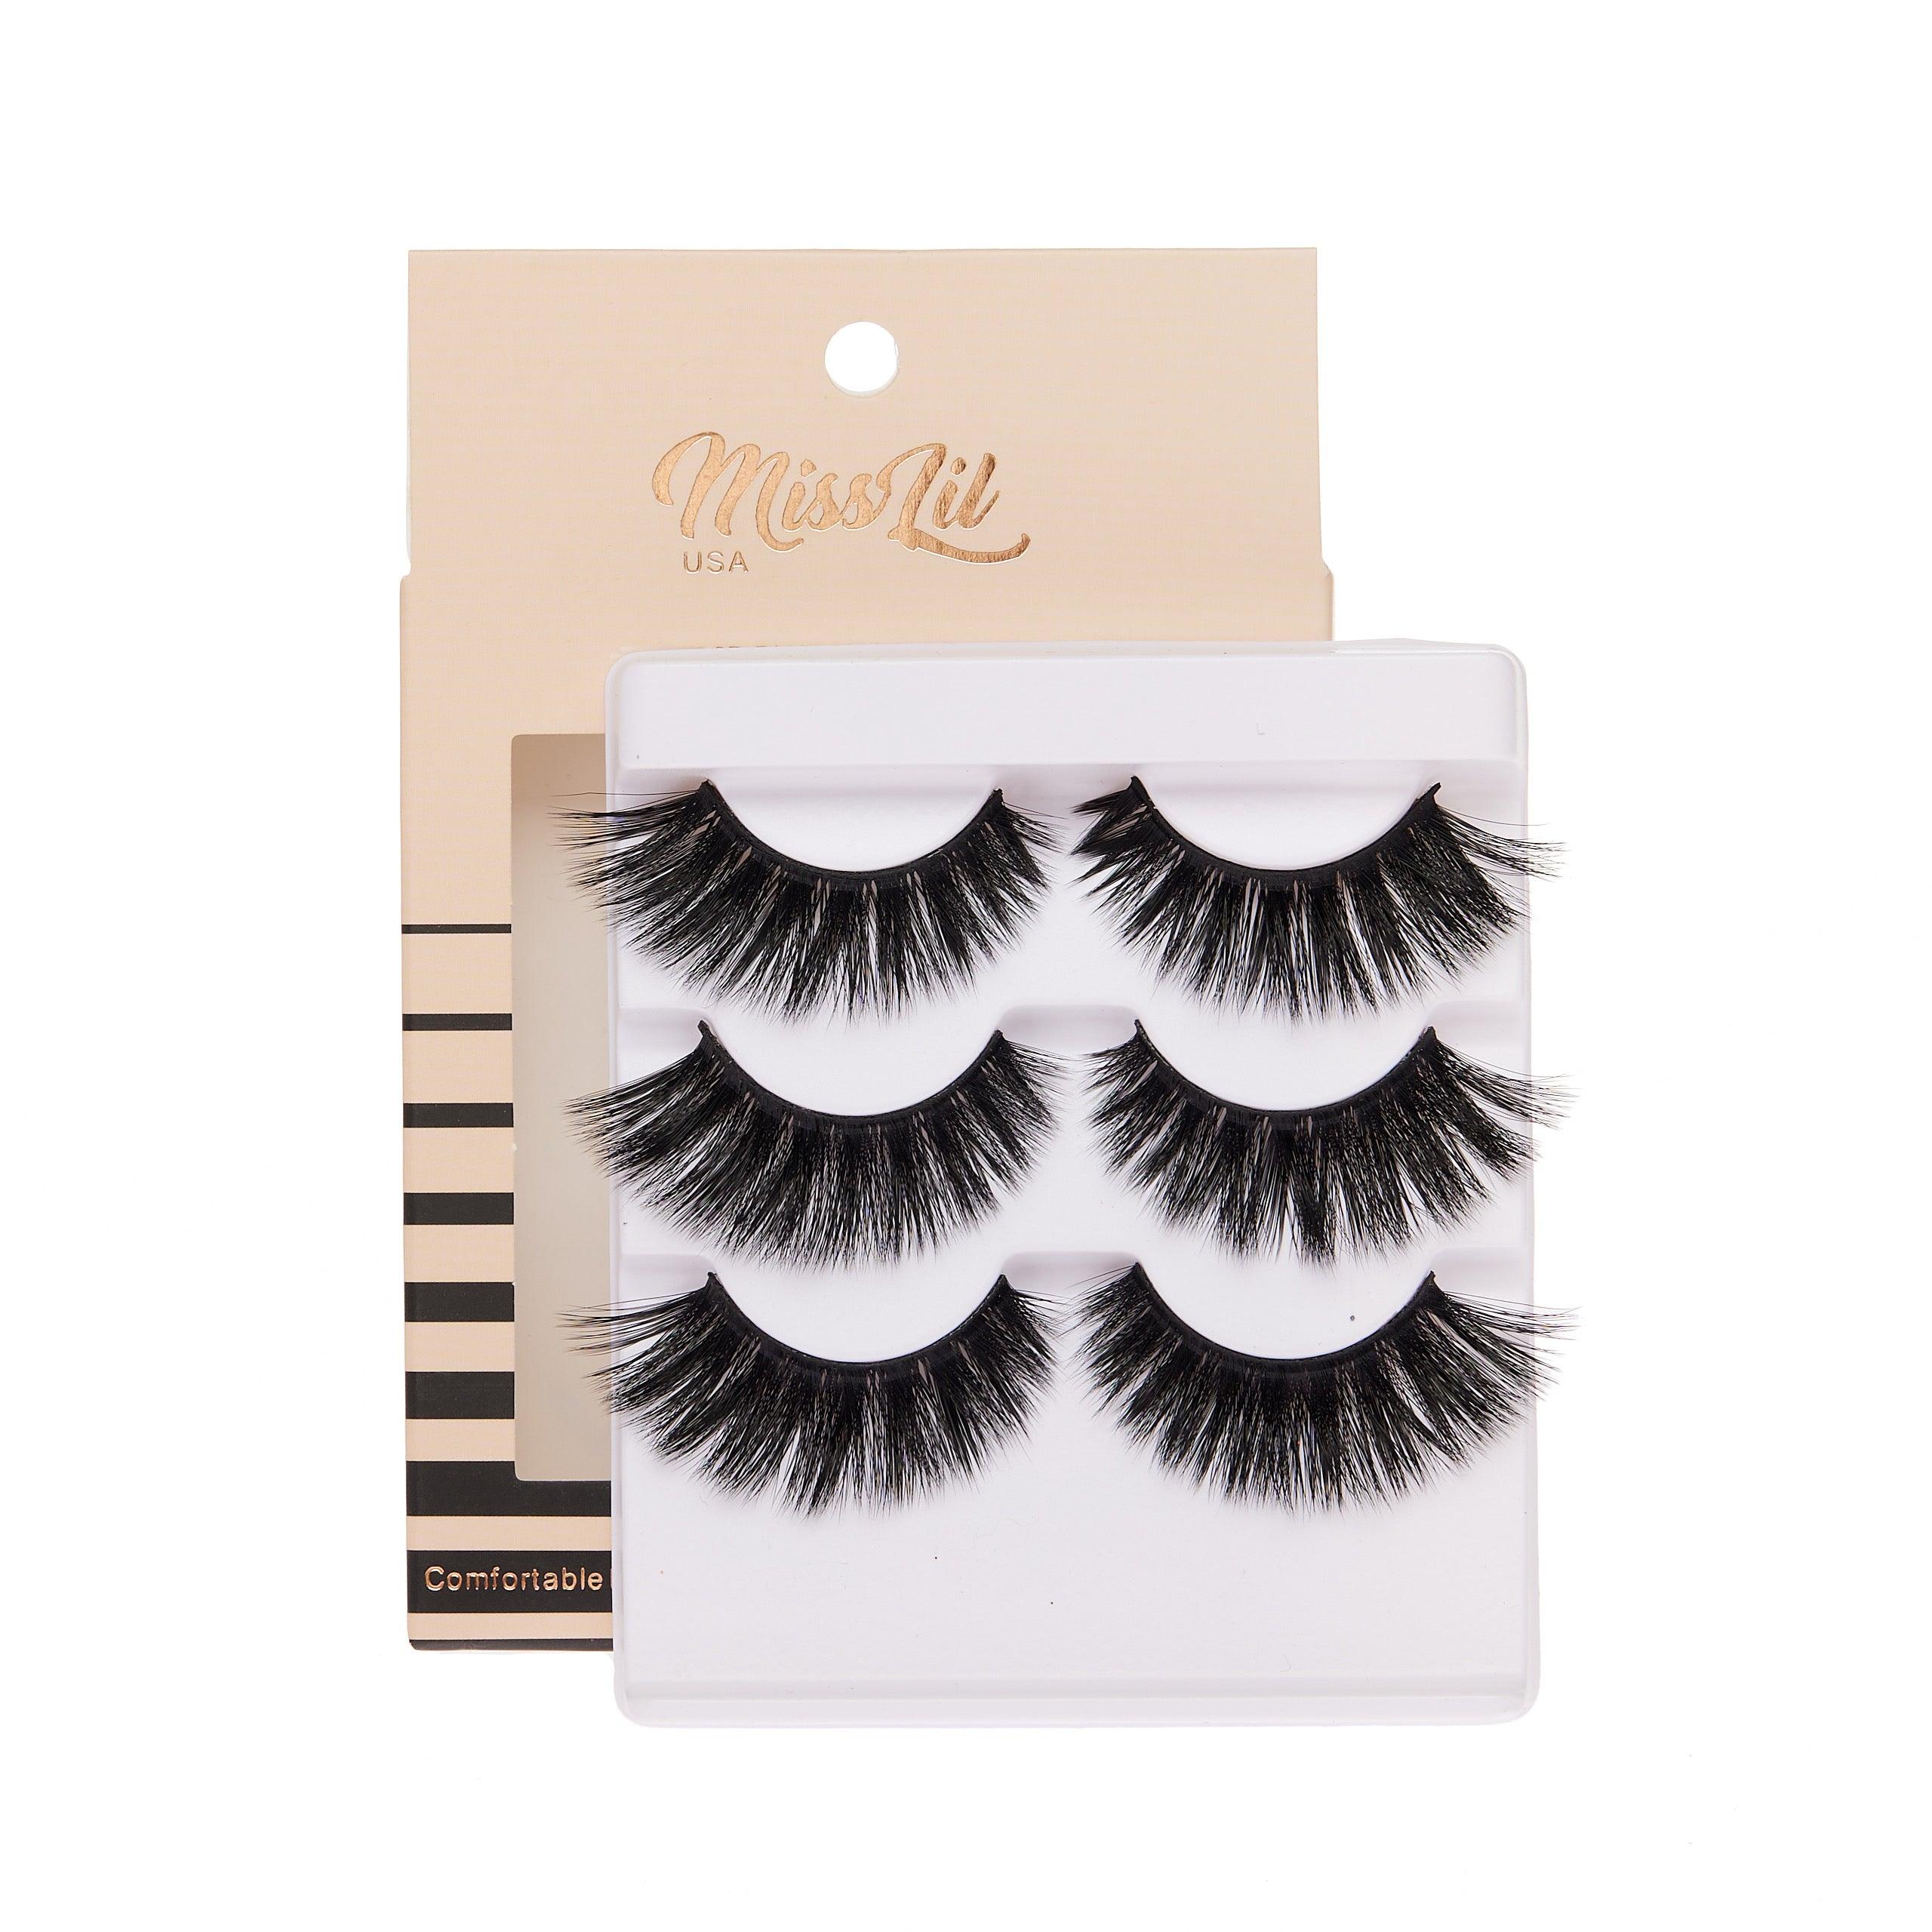 3-Pair Faux 9D Mink Eyelashes - Luxury Collection #13 - Pack of 3 - Miss Lil USA